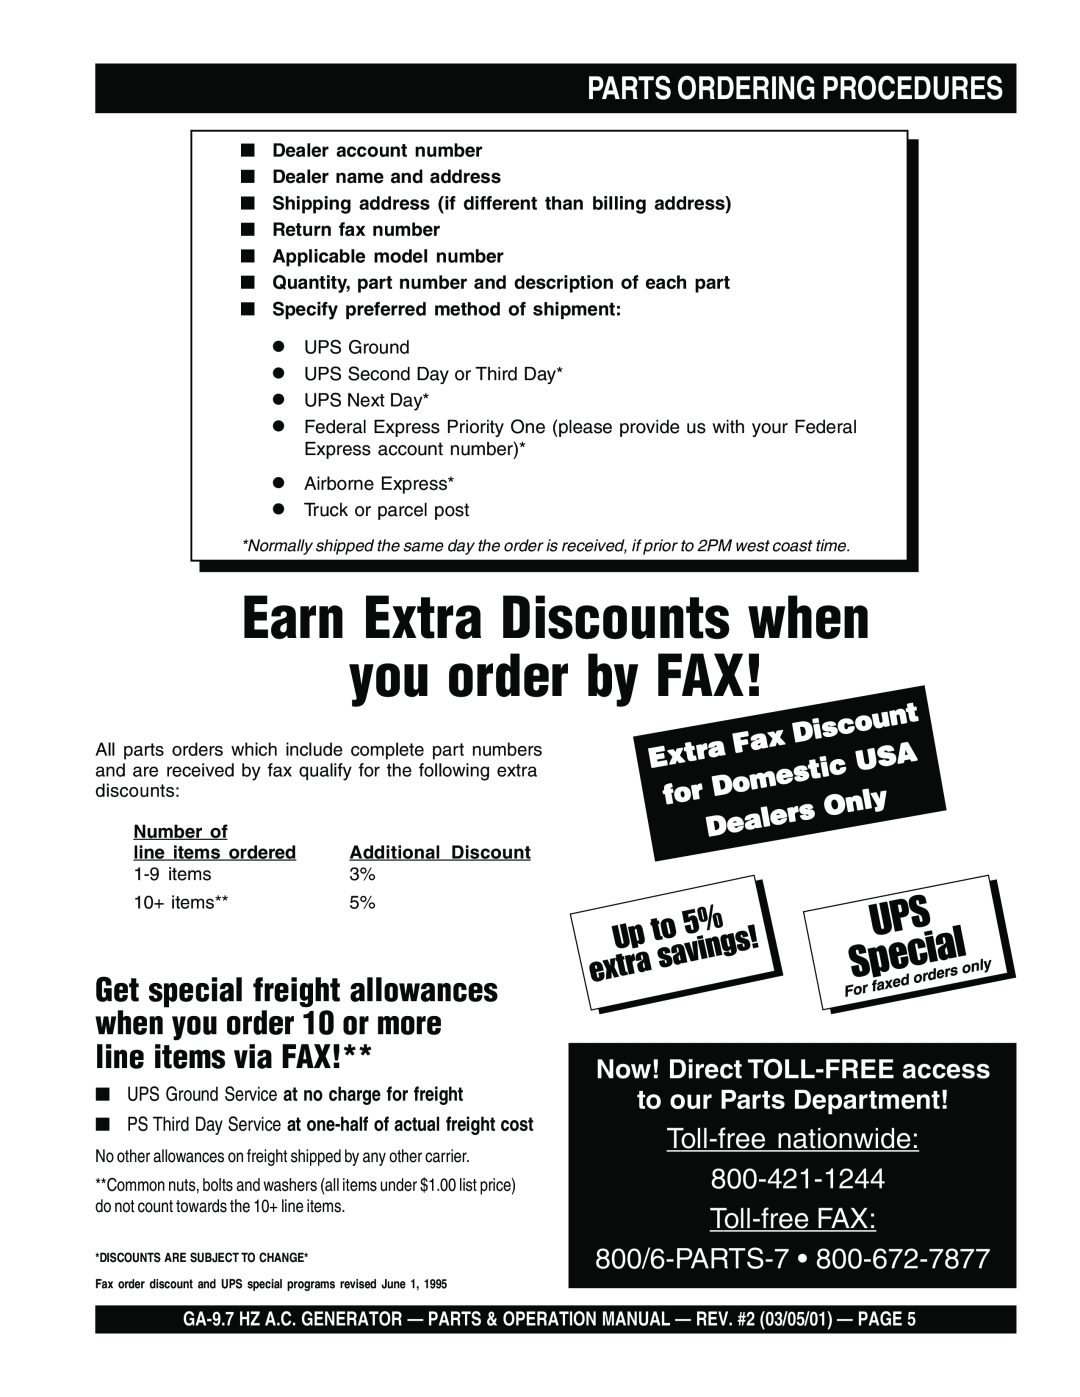 Multiquip GA-9.7 HZ Earn Extra Discounts when you order by FAX, Parts Ordering Procedures, Domestic, Dealers, Only 